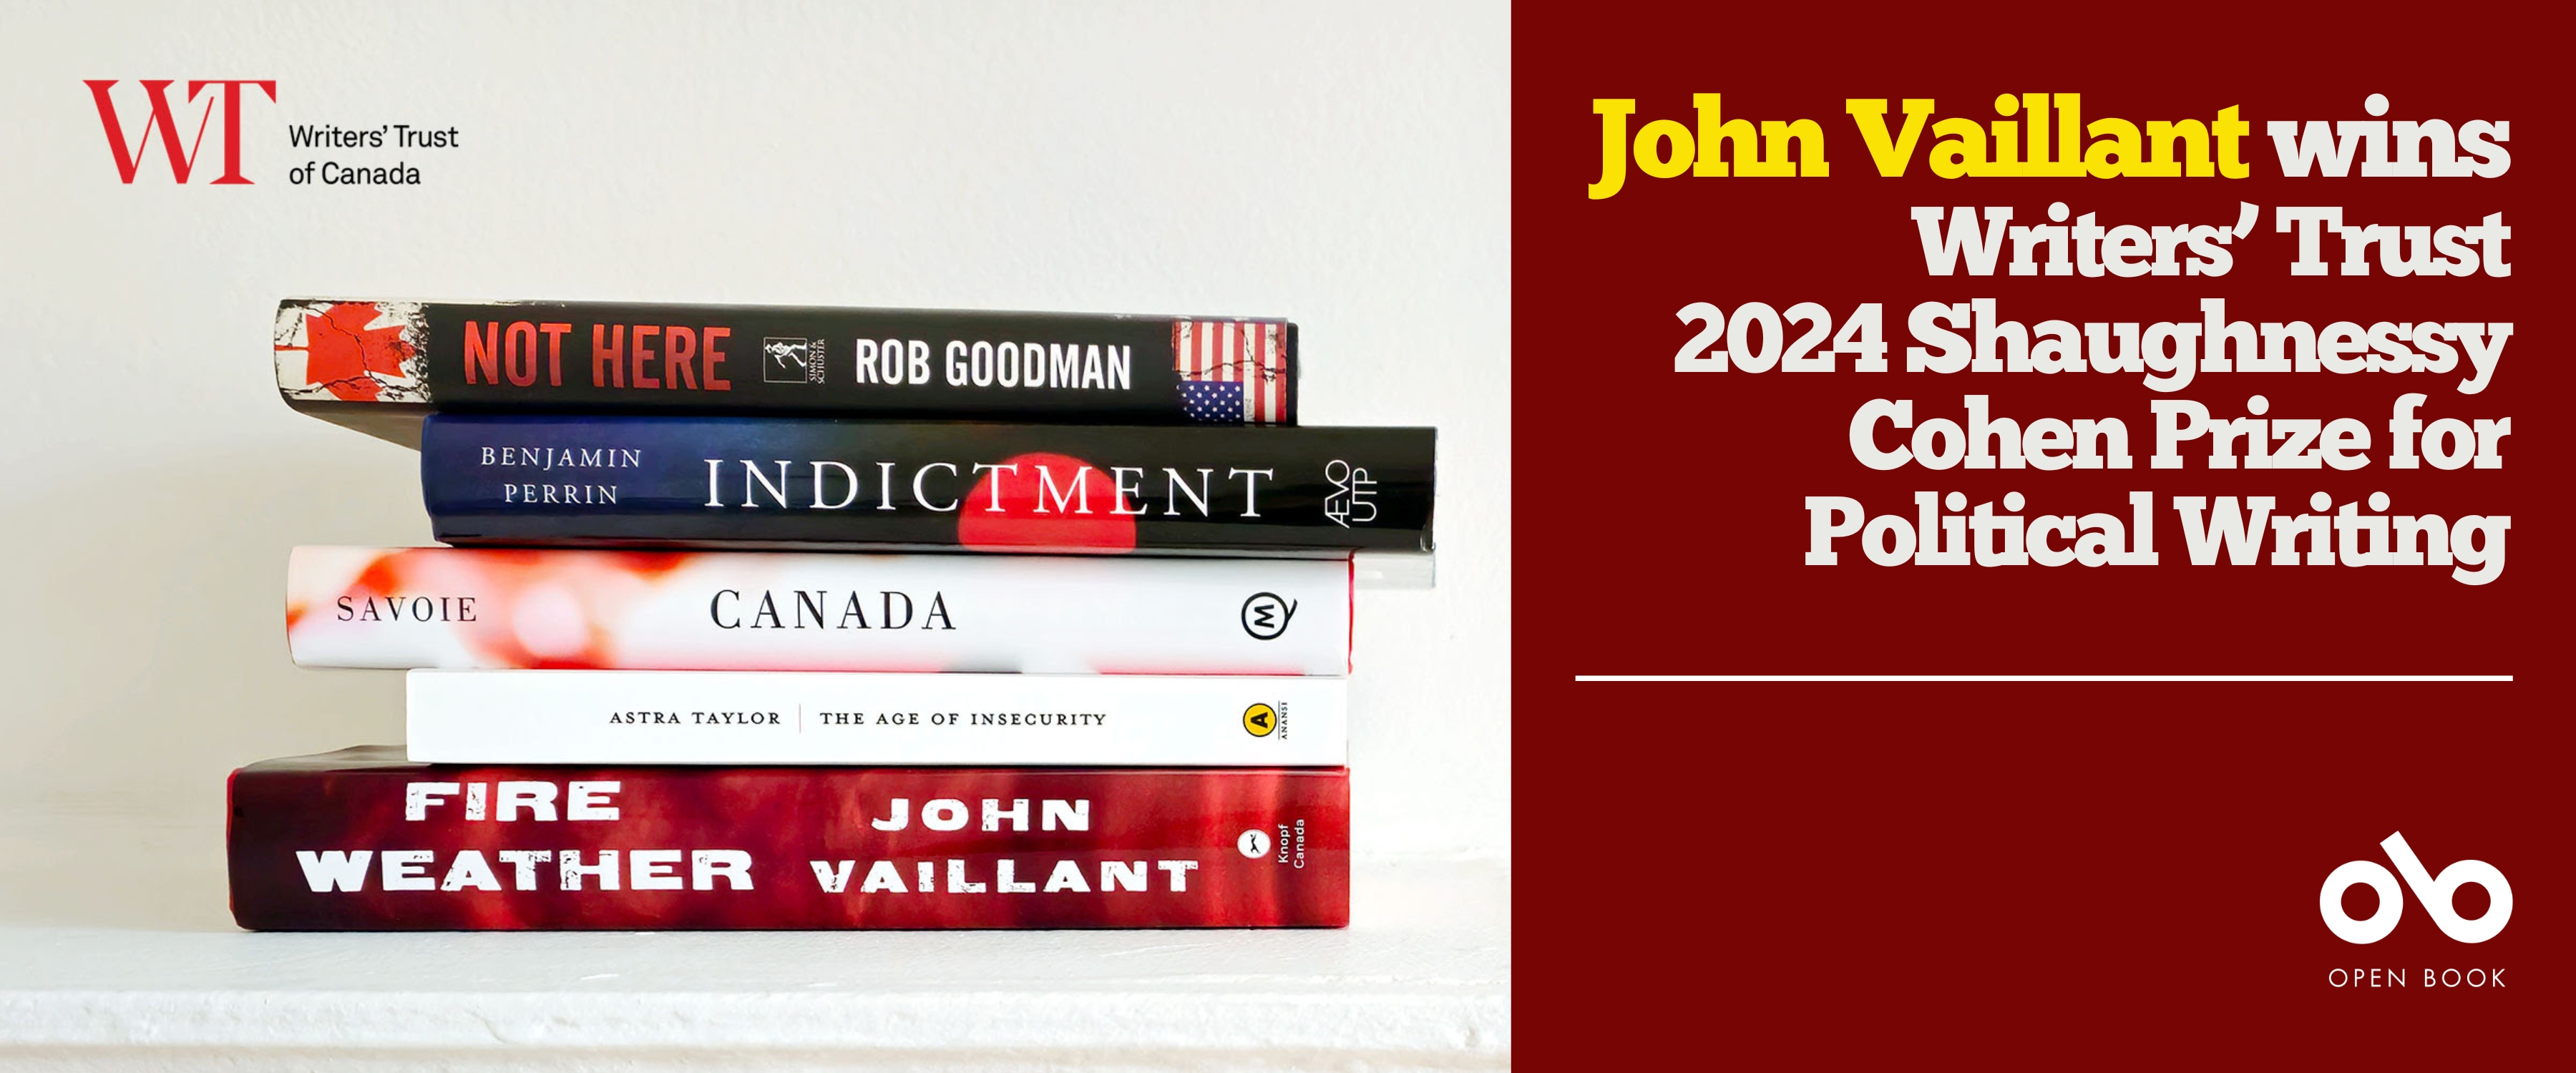 John Vaillant Wins the 2024 Writers' Trust Shaughnessy Cohen Prize for Political Writing